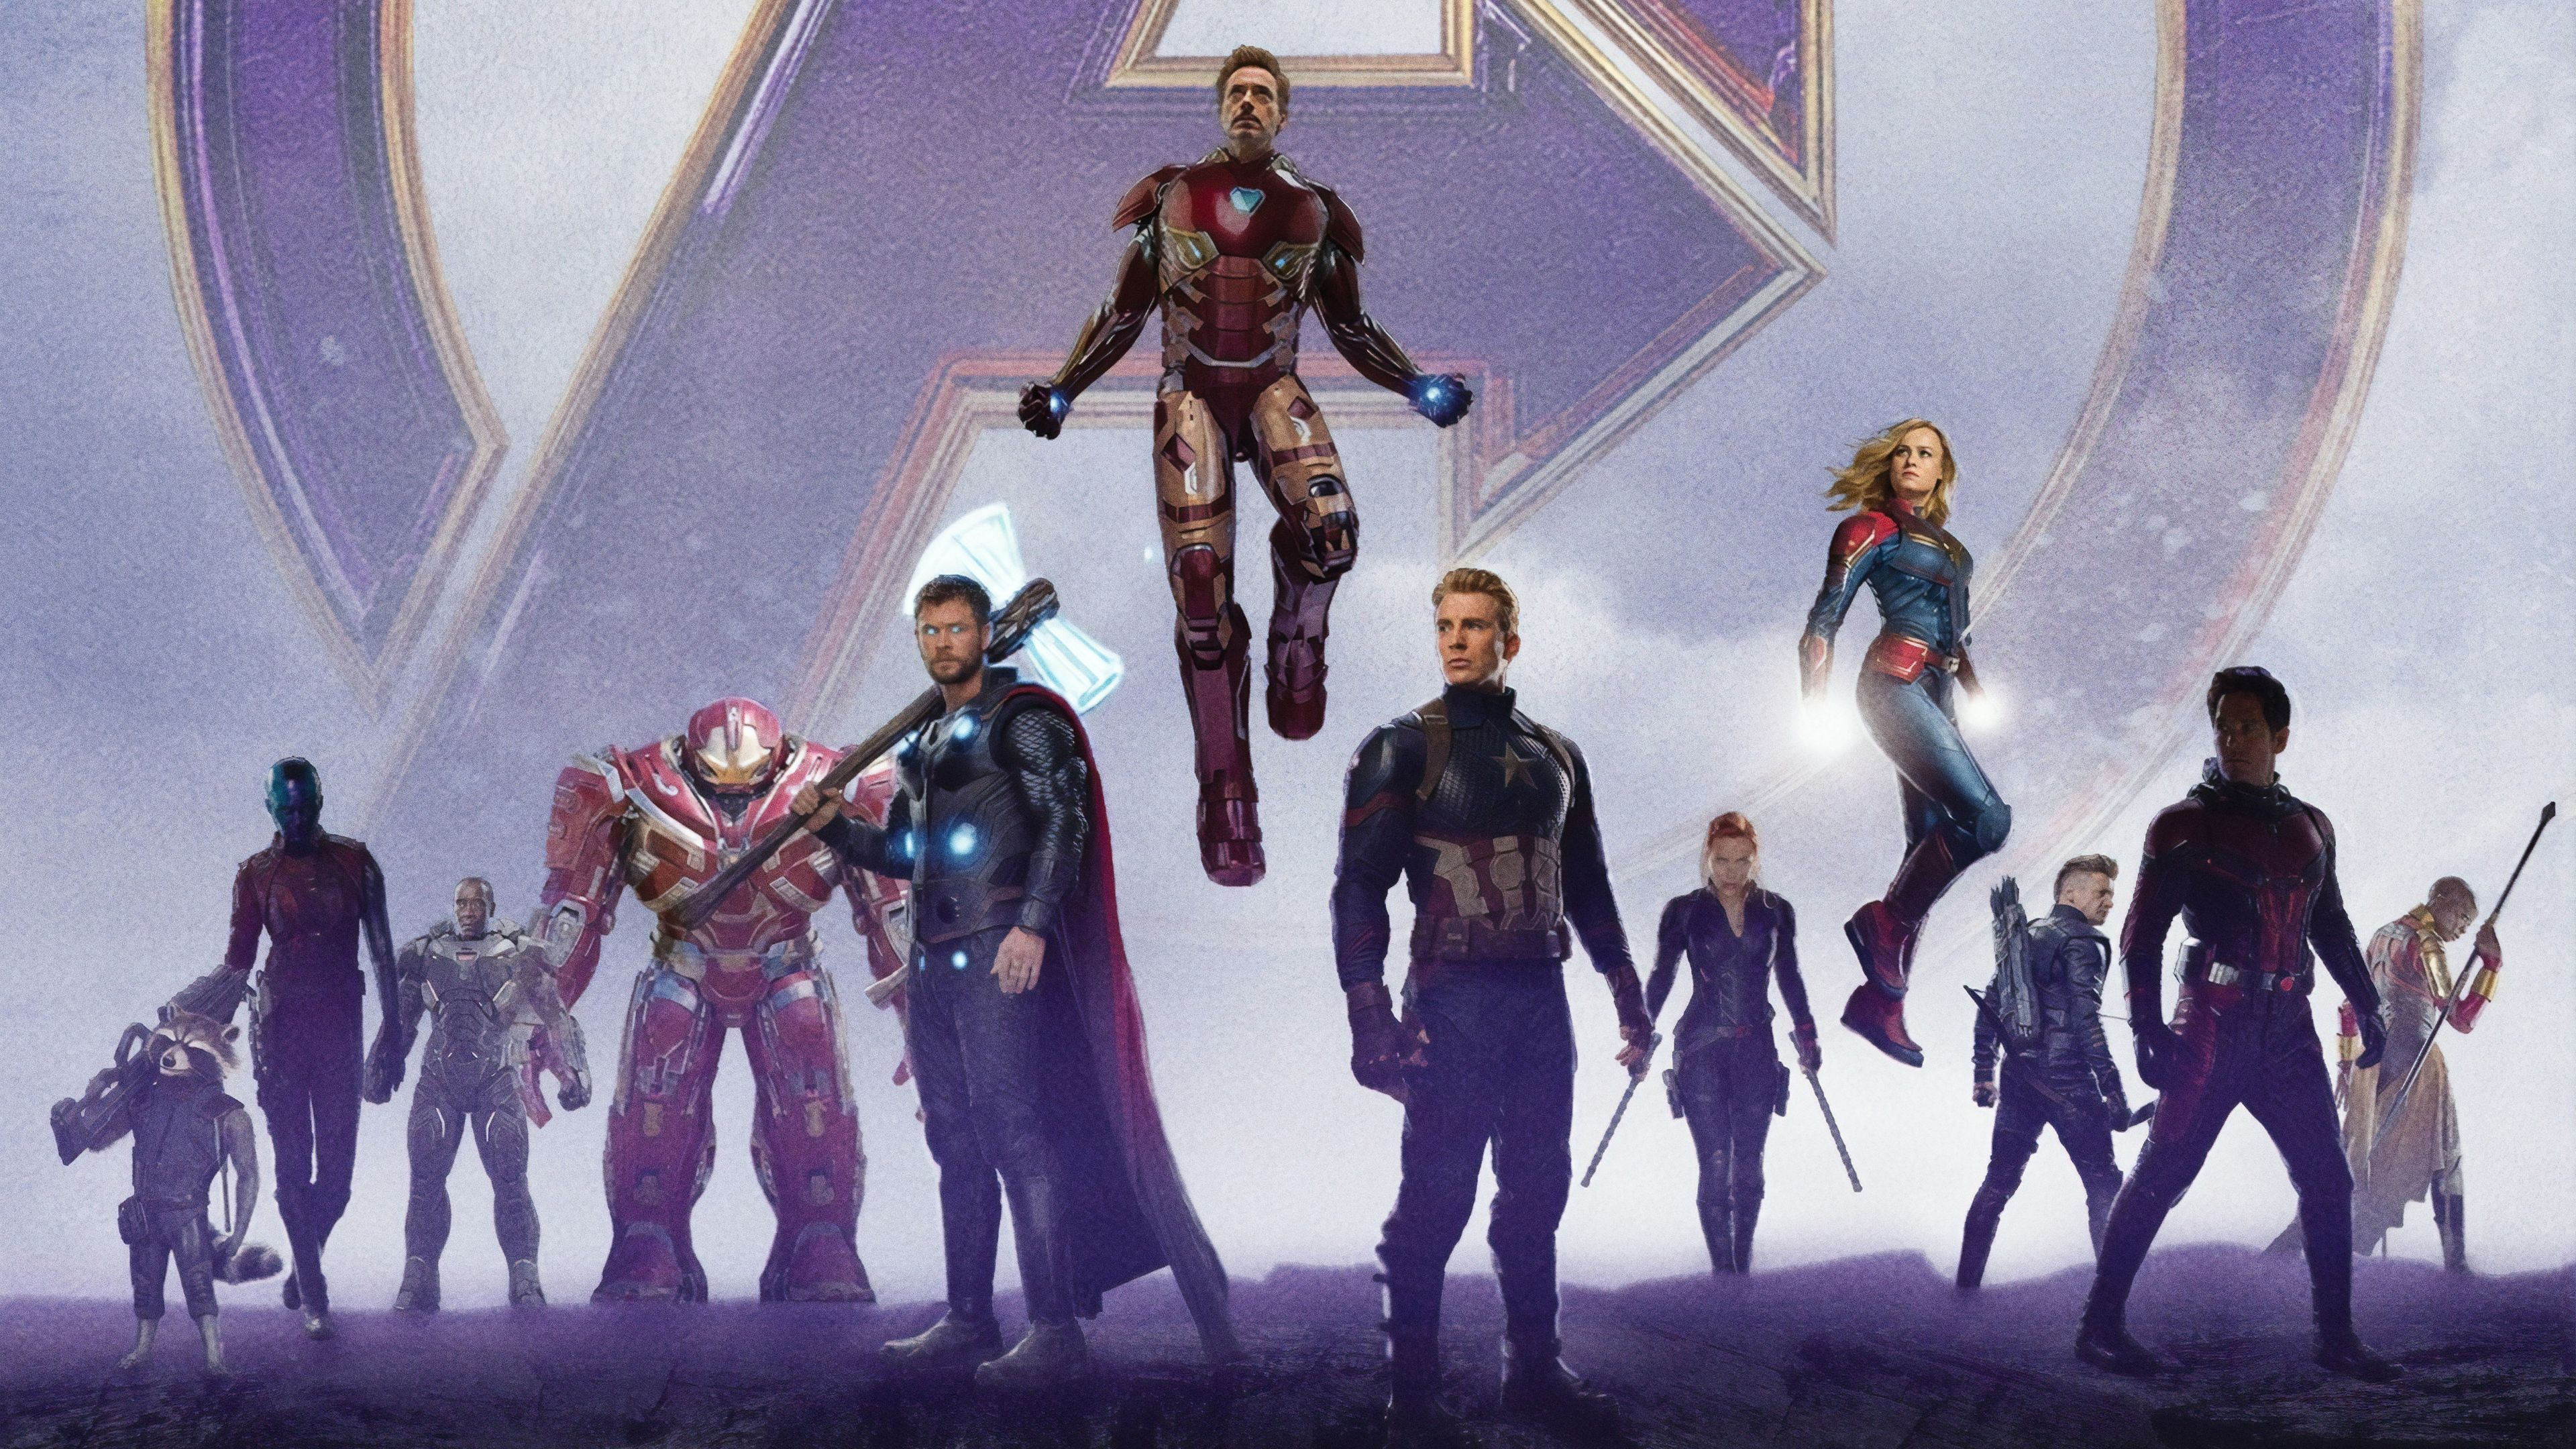 Captain America And Iron Man Avengers Endgame Wallpapers